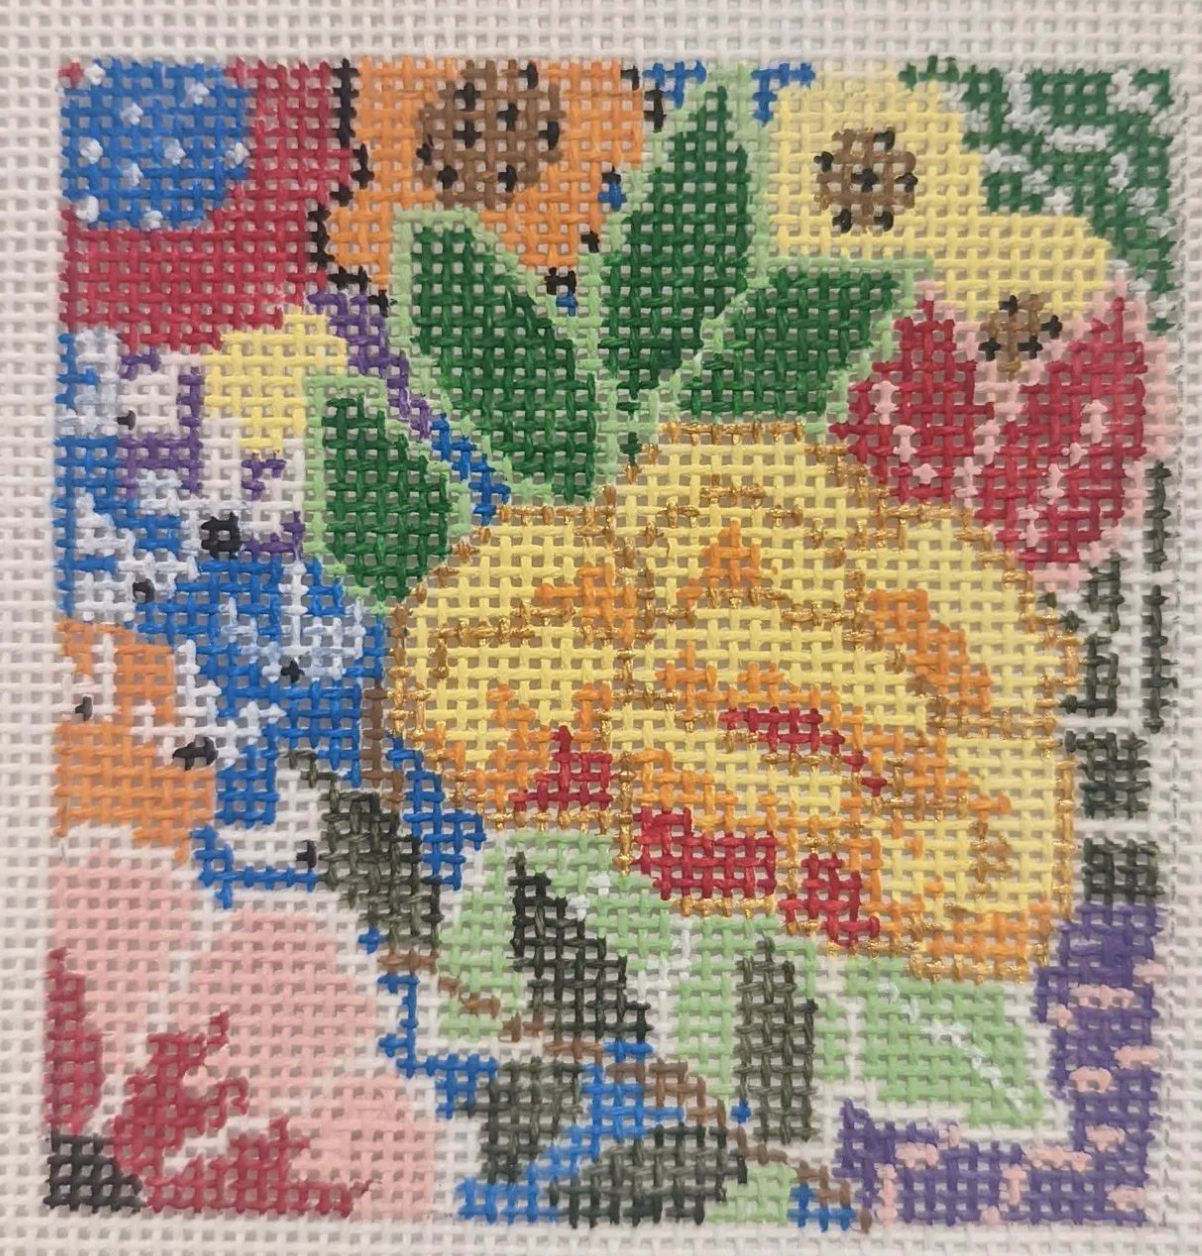 LL-IN-1 Floral Square Insert